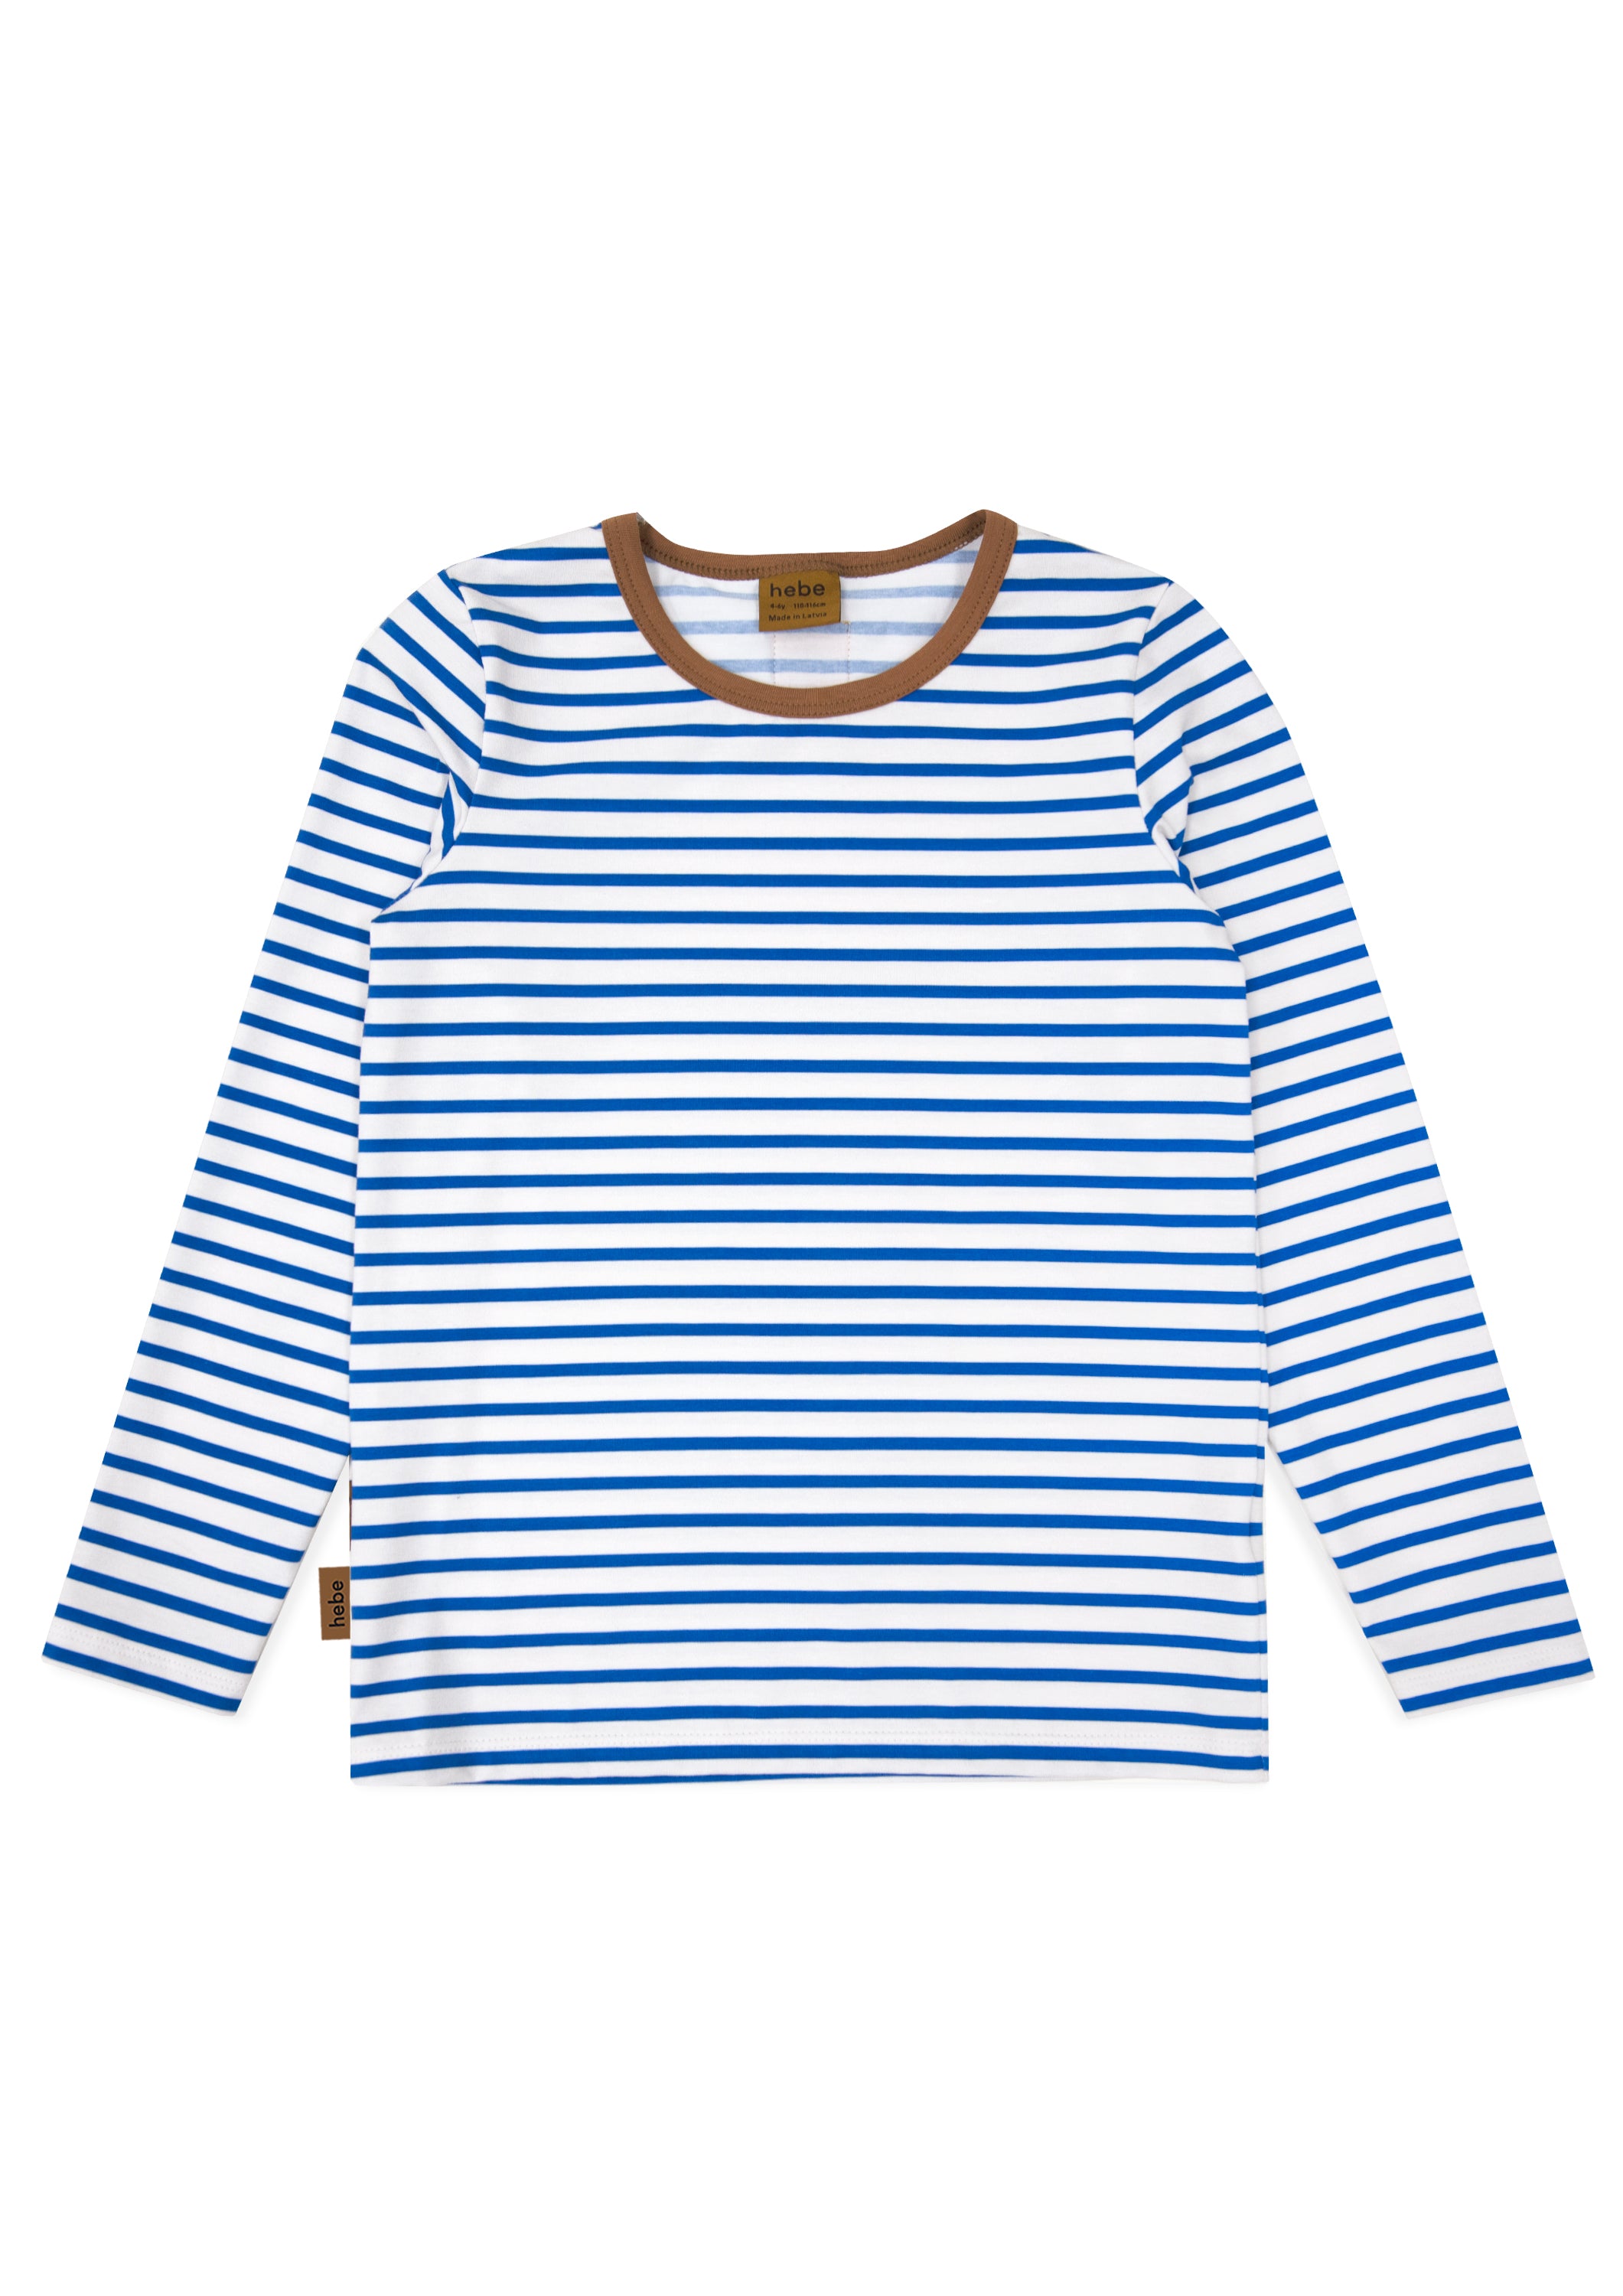 Hebe Blue Stripes Top